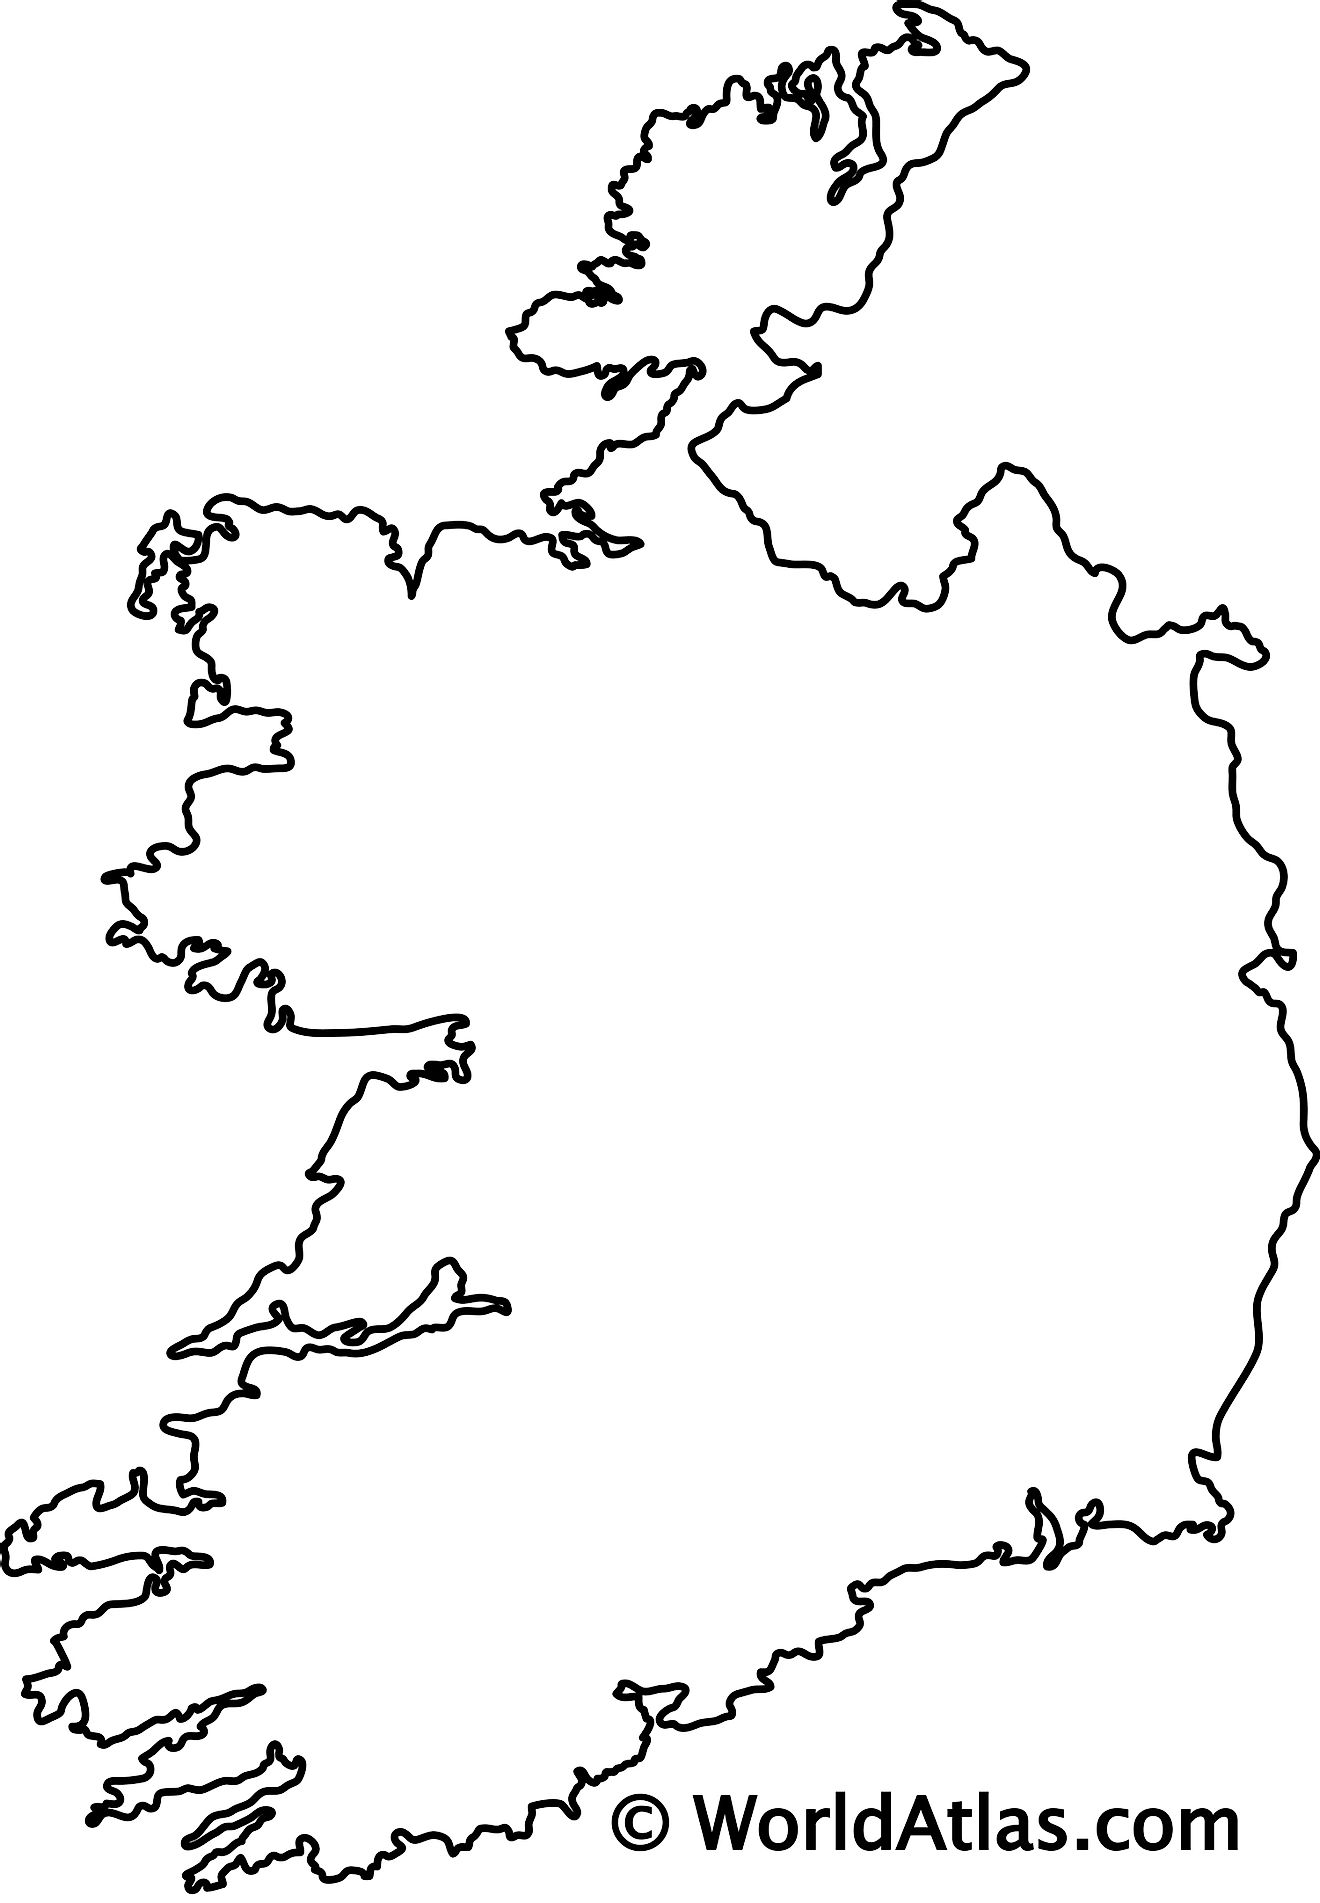 Blank Outline Map of Ireland